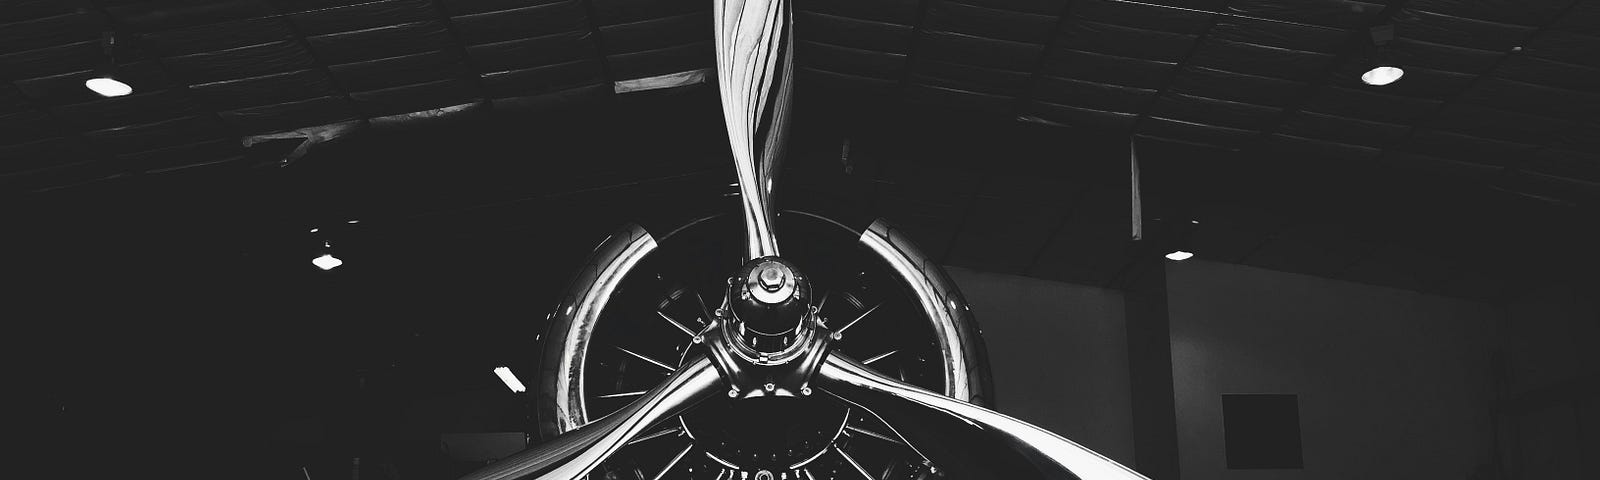 A black and white photo of the front of an airplane propeller.